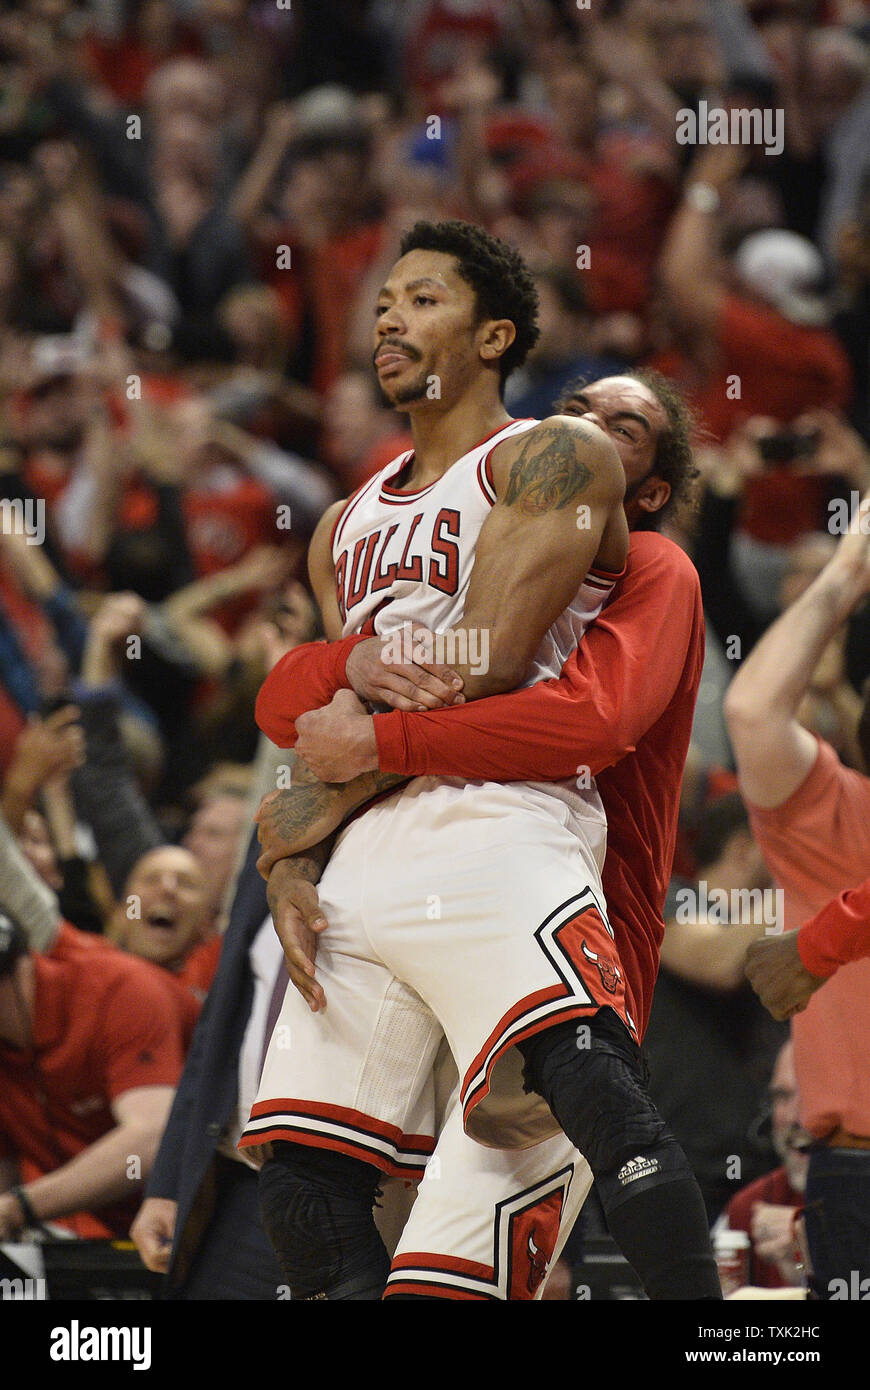 Chicago Bulls center Joakim Noah (R) hugs guard Derrick Rose after Rose hit  a last second three-point shot to defeat the Cleveland Cavaliers after game  3 of the Eastern Conference Semifinals of